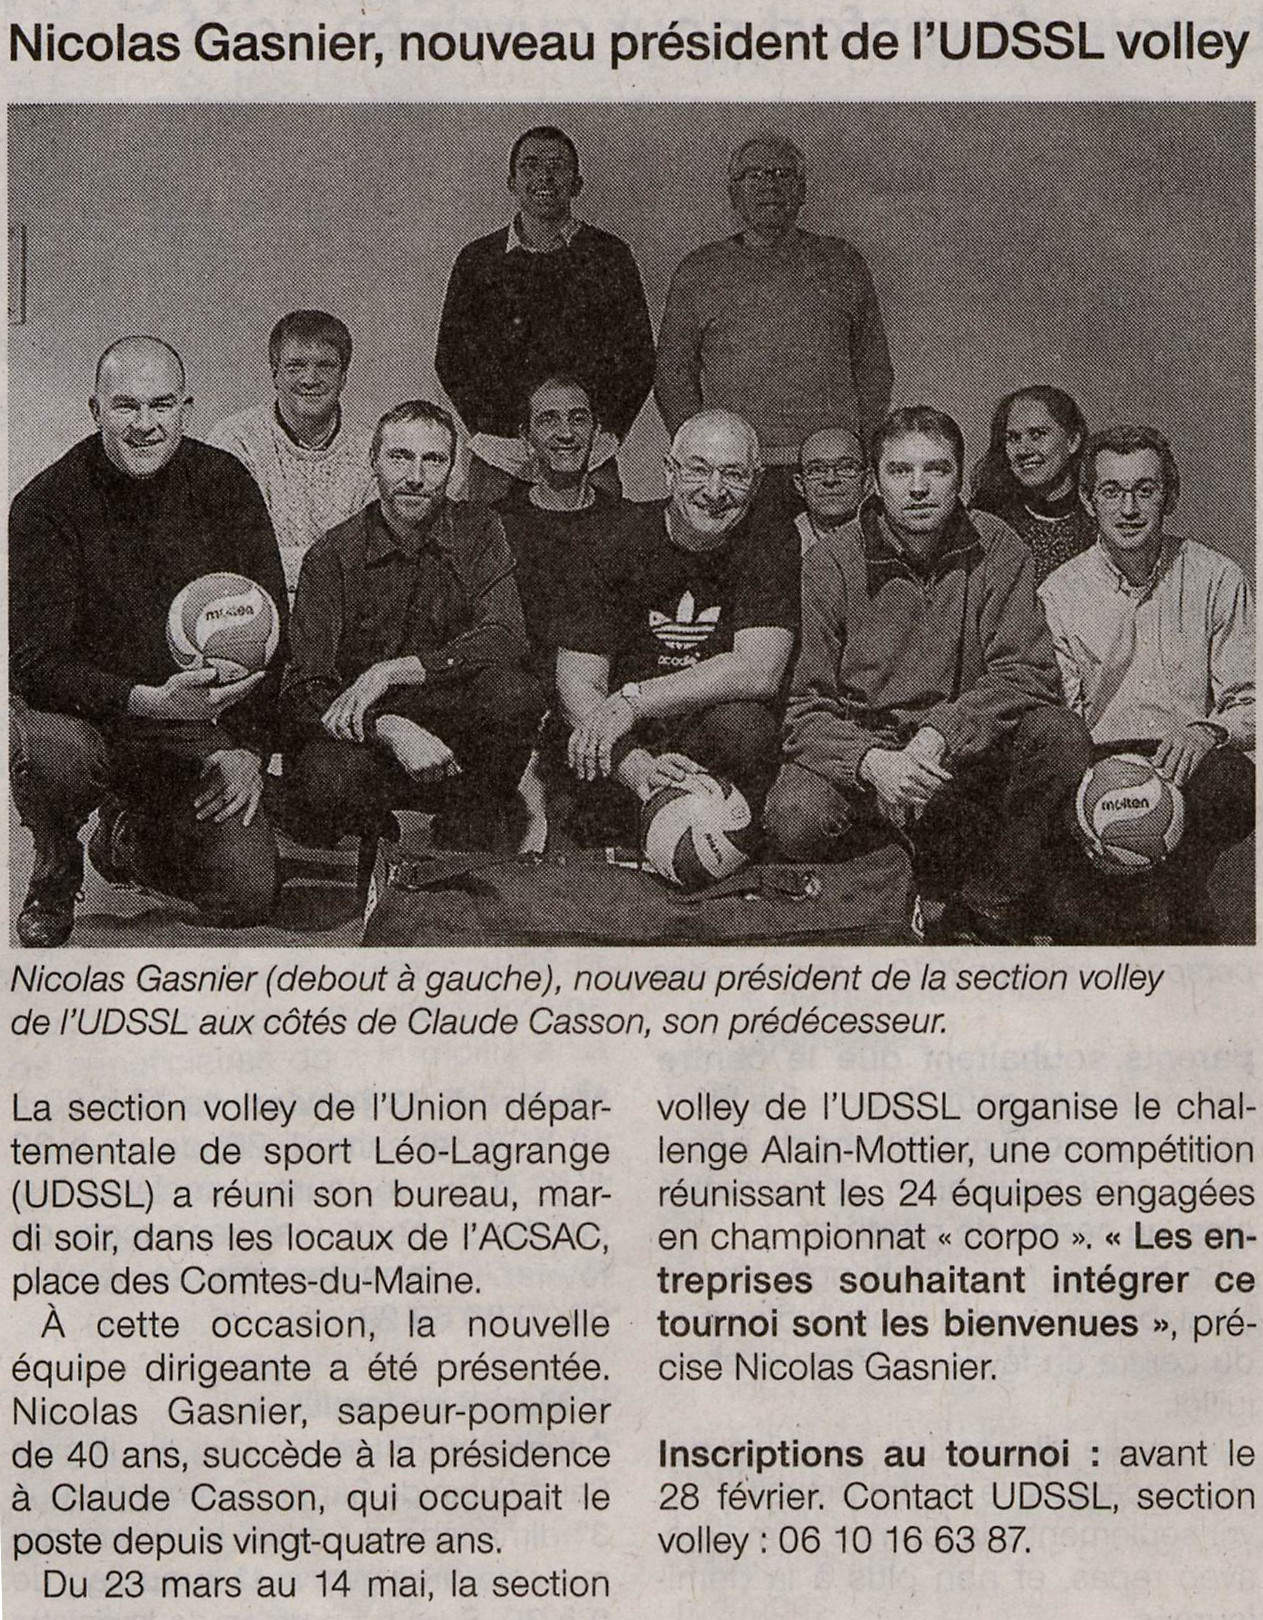 ArticleOuestFrance 2013-01-17